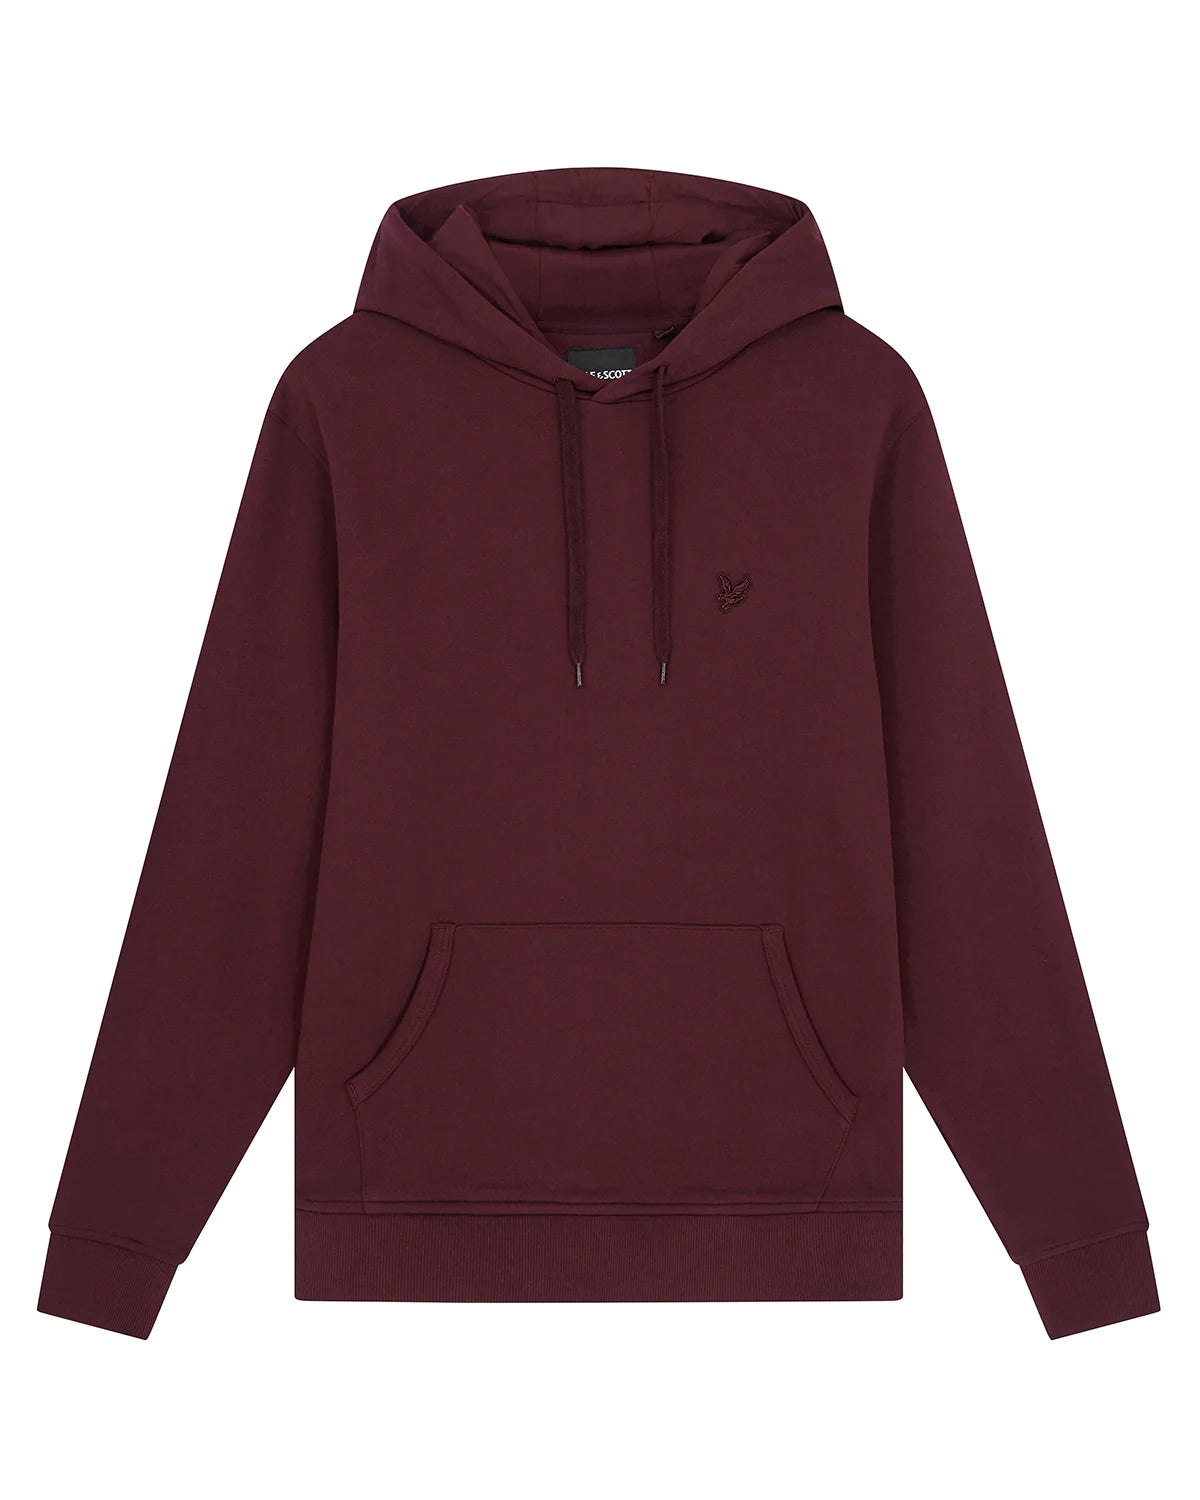 Lyle and Scott Tonal Eagle Pullover Hoodie Burgundy - ML416TON